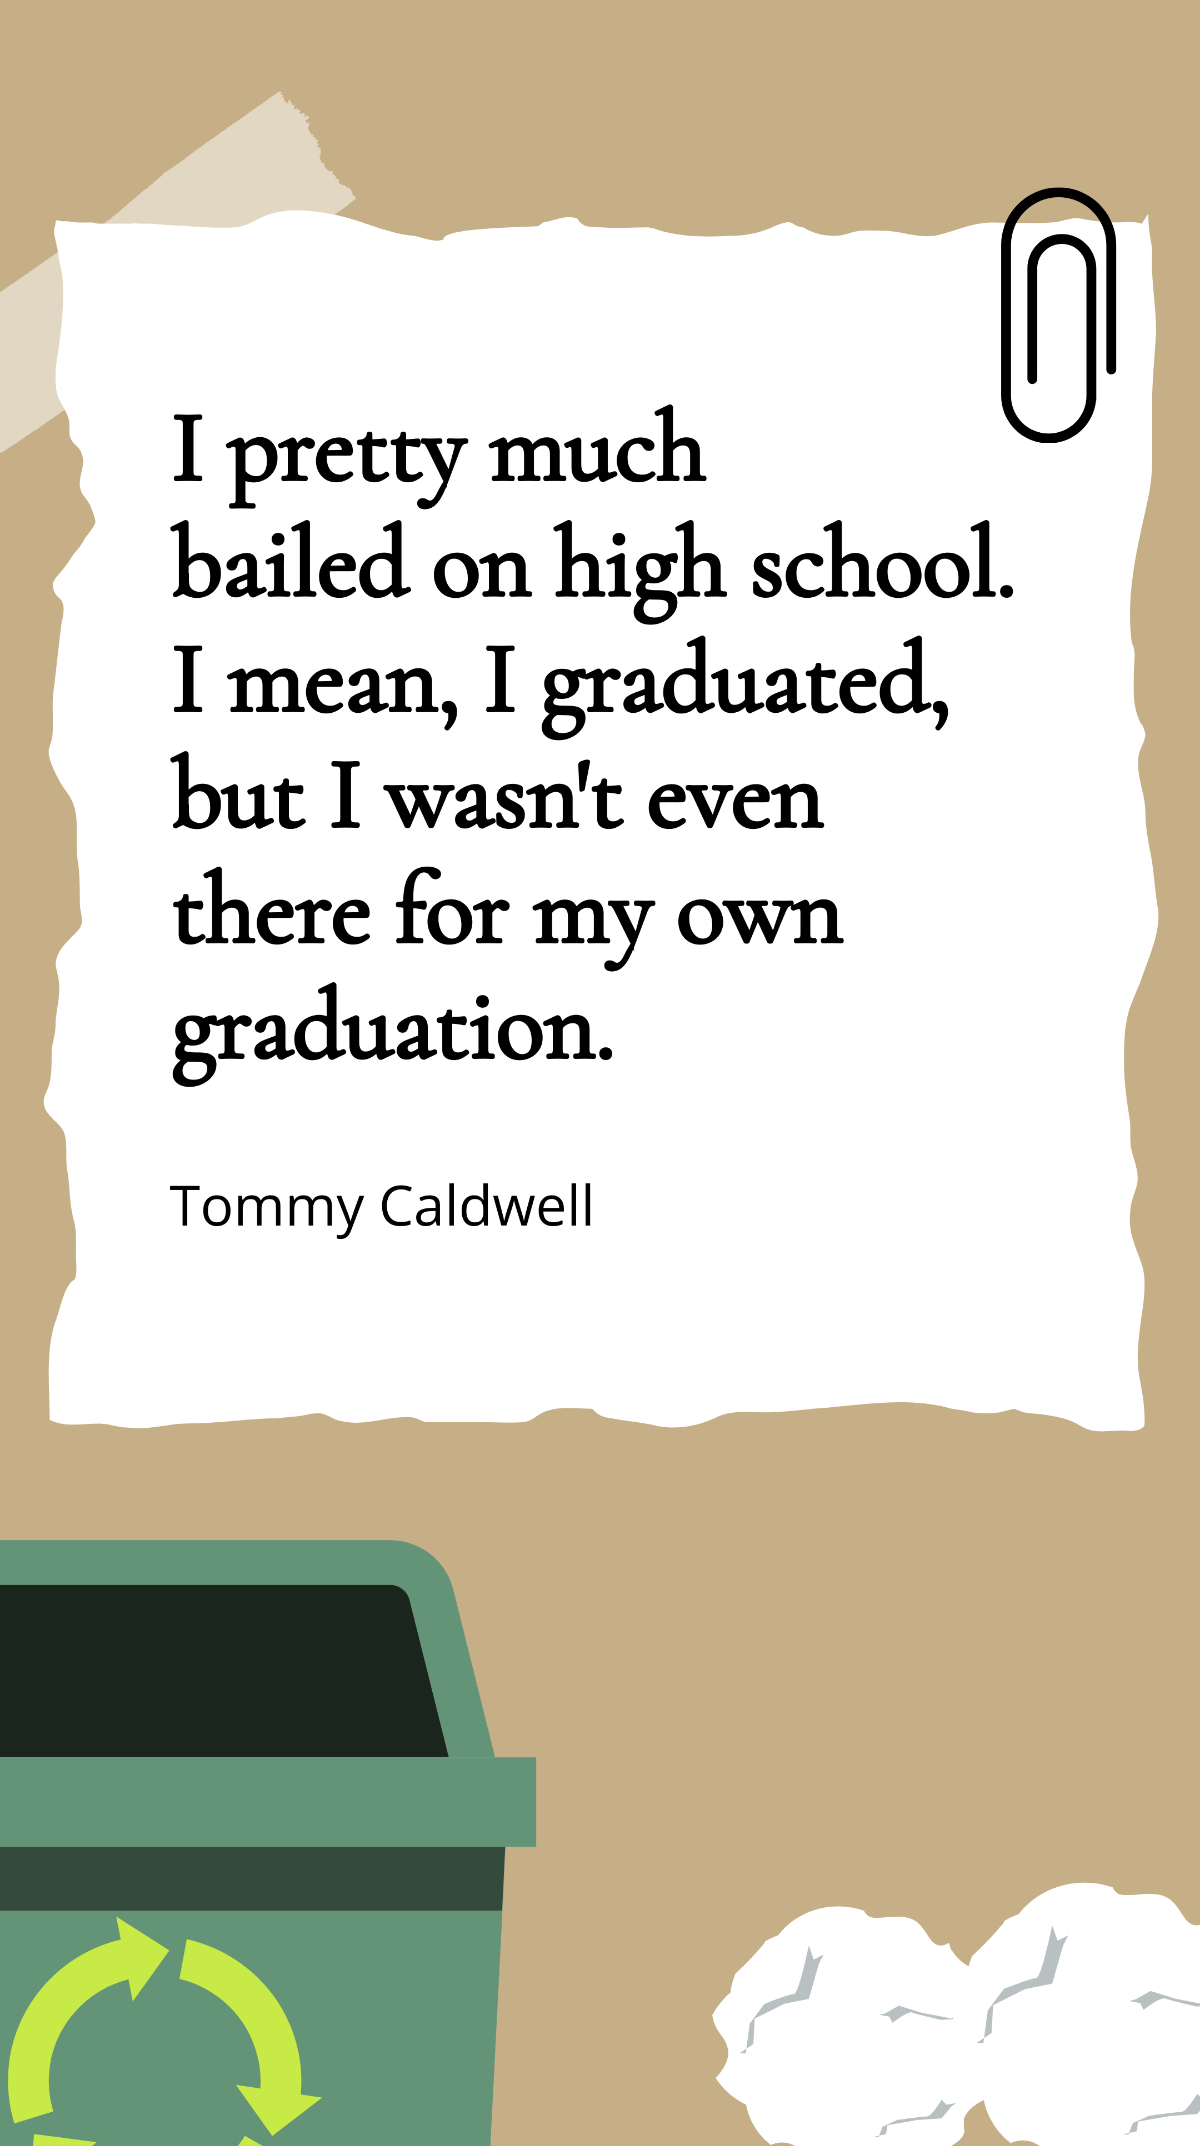 Tommy Caldwell - I pretty much bailed on high school. I mean, I graduated, but I wasn't even there for my own graduation.